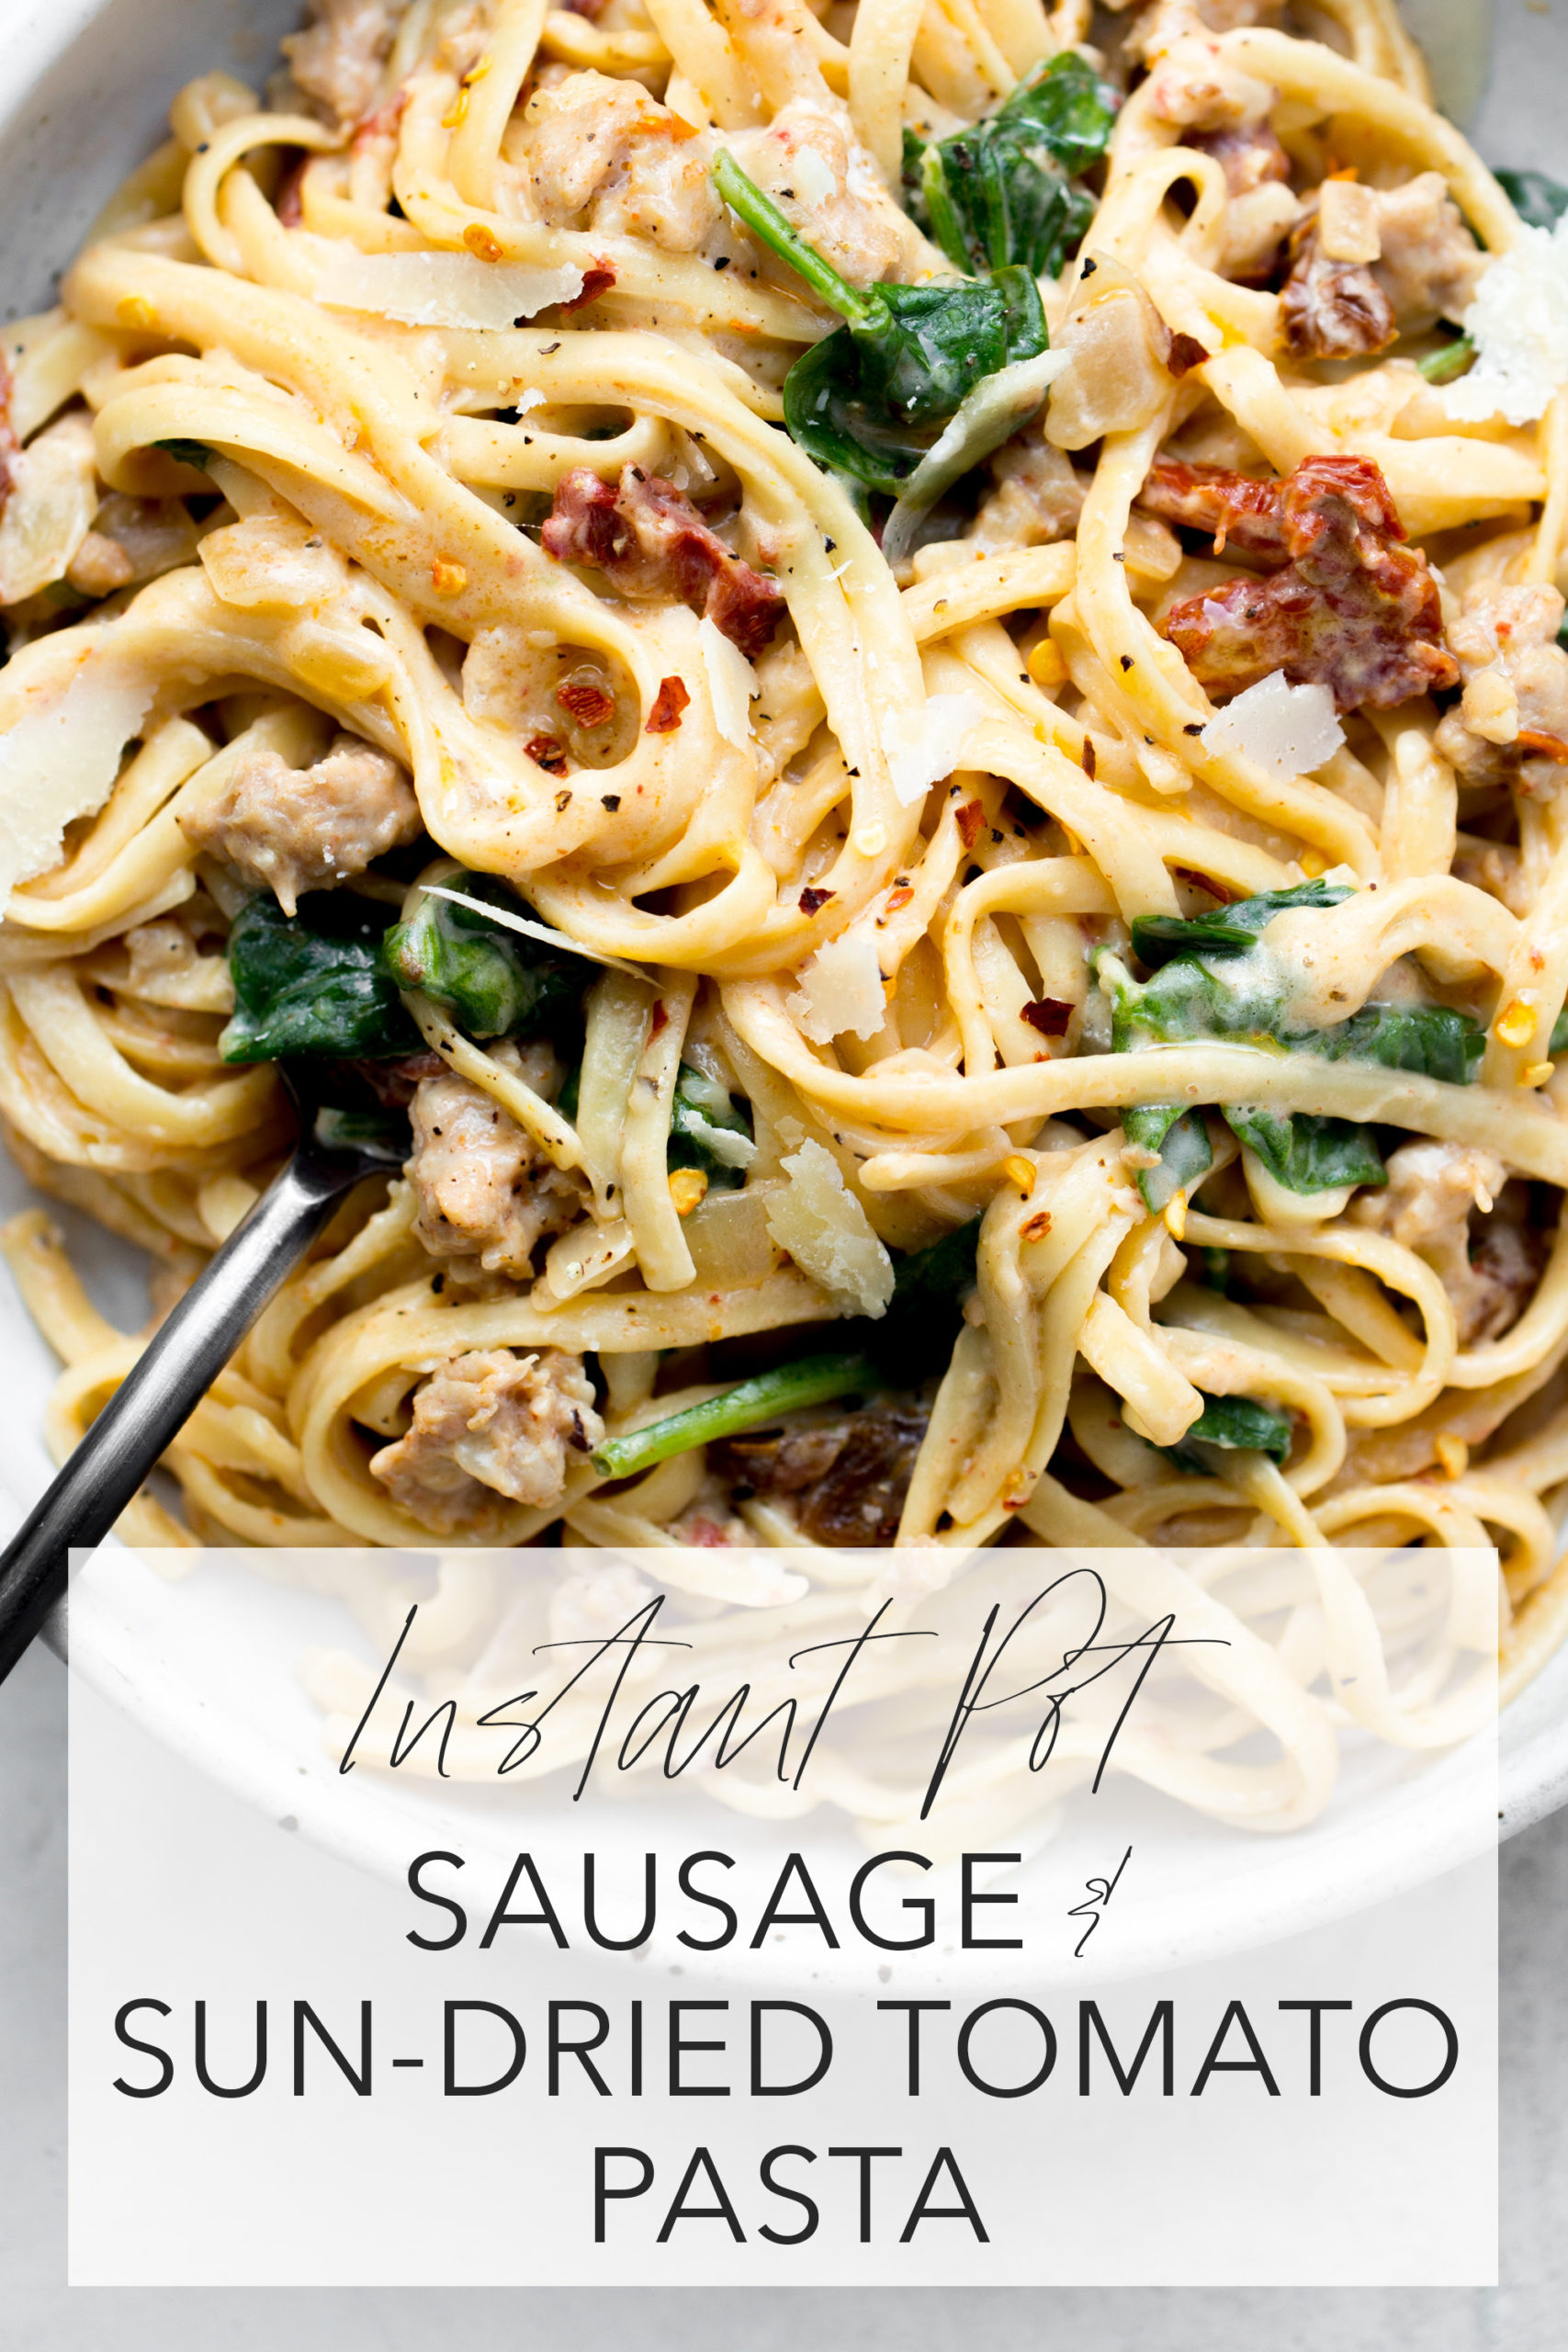 instant pot sausage sun-dried tomato pasta overhead in a gray bowl with title text overlay